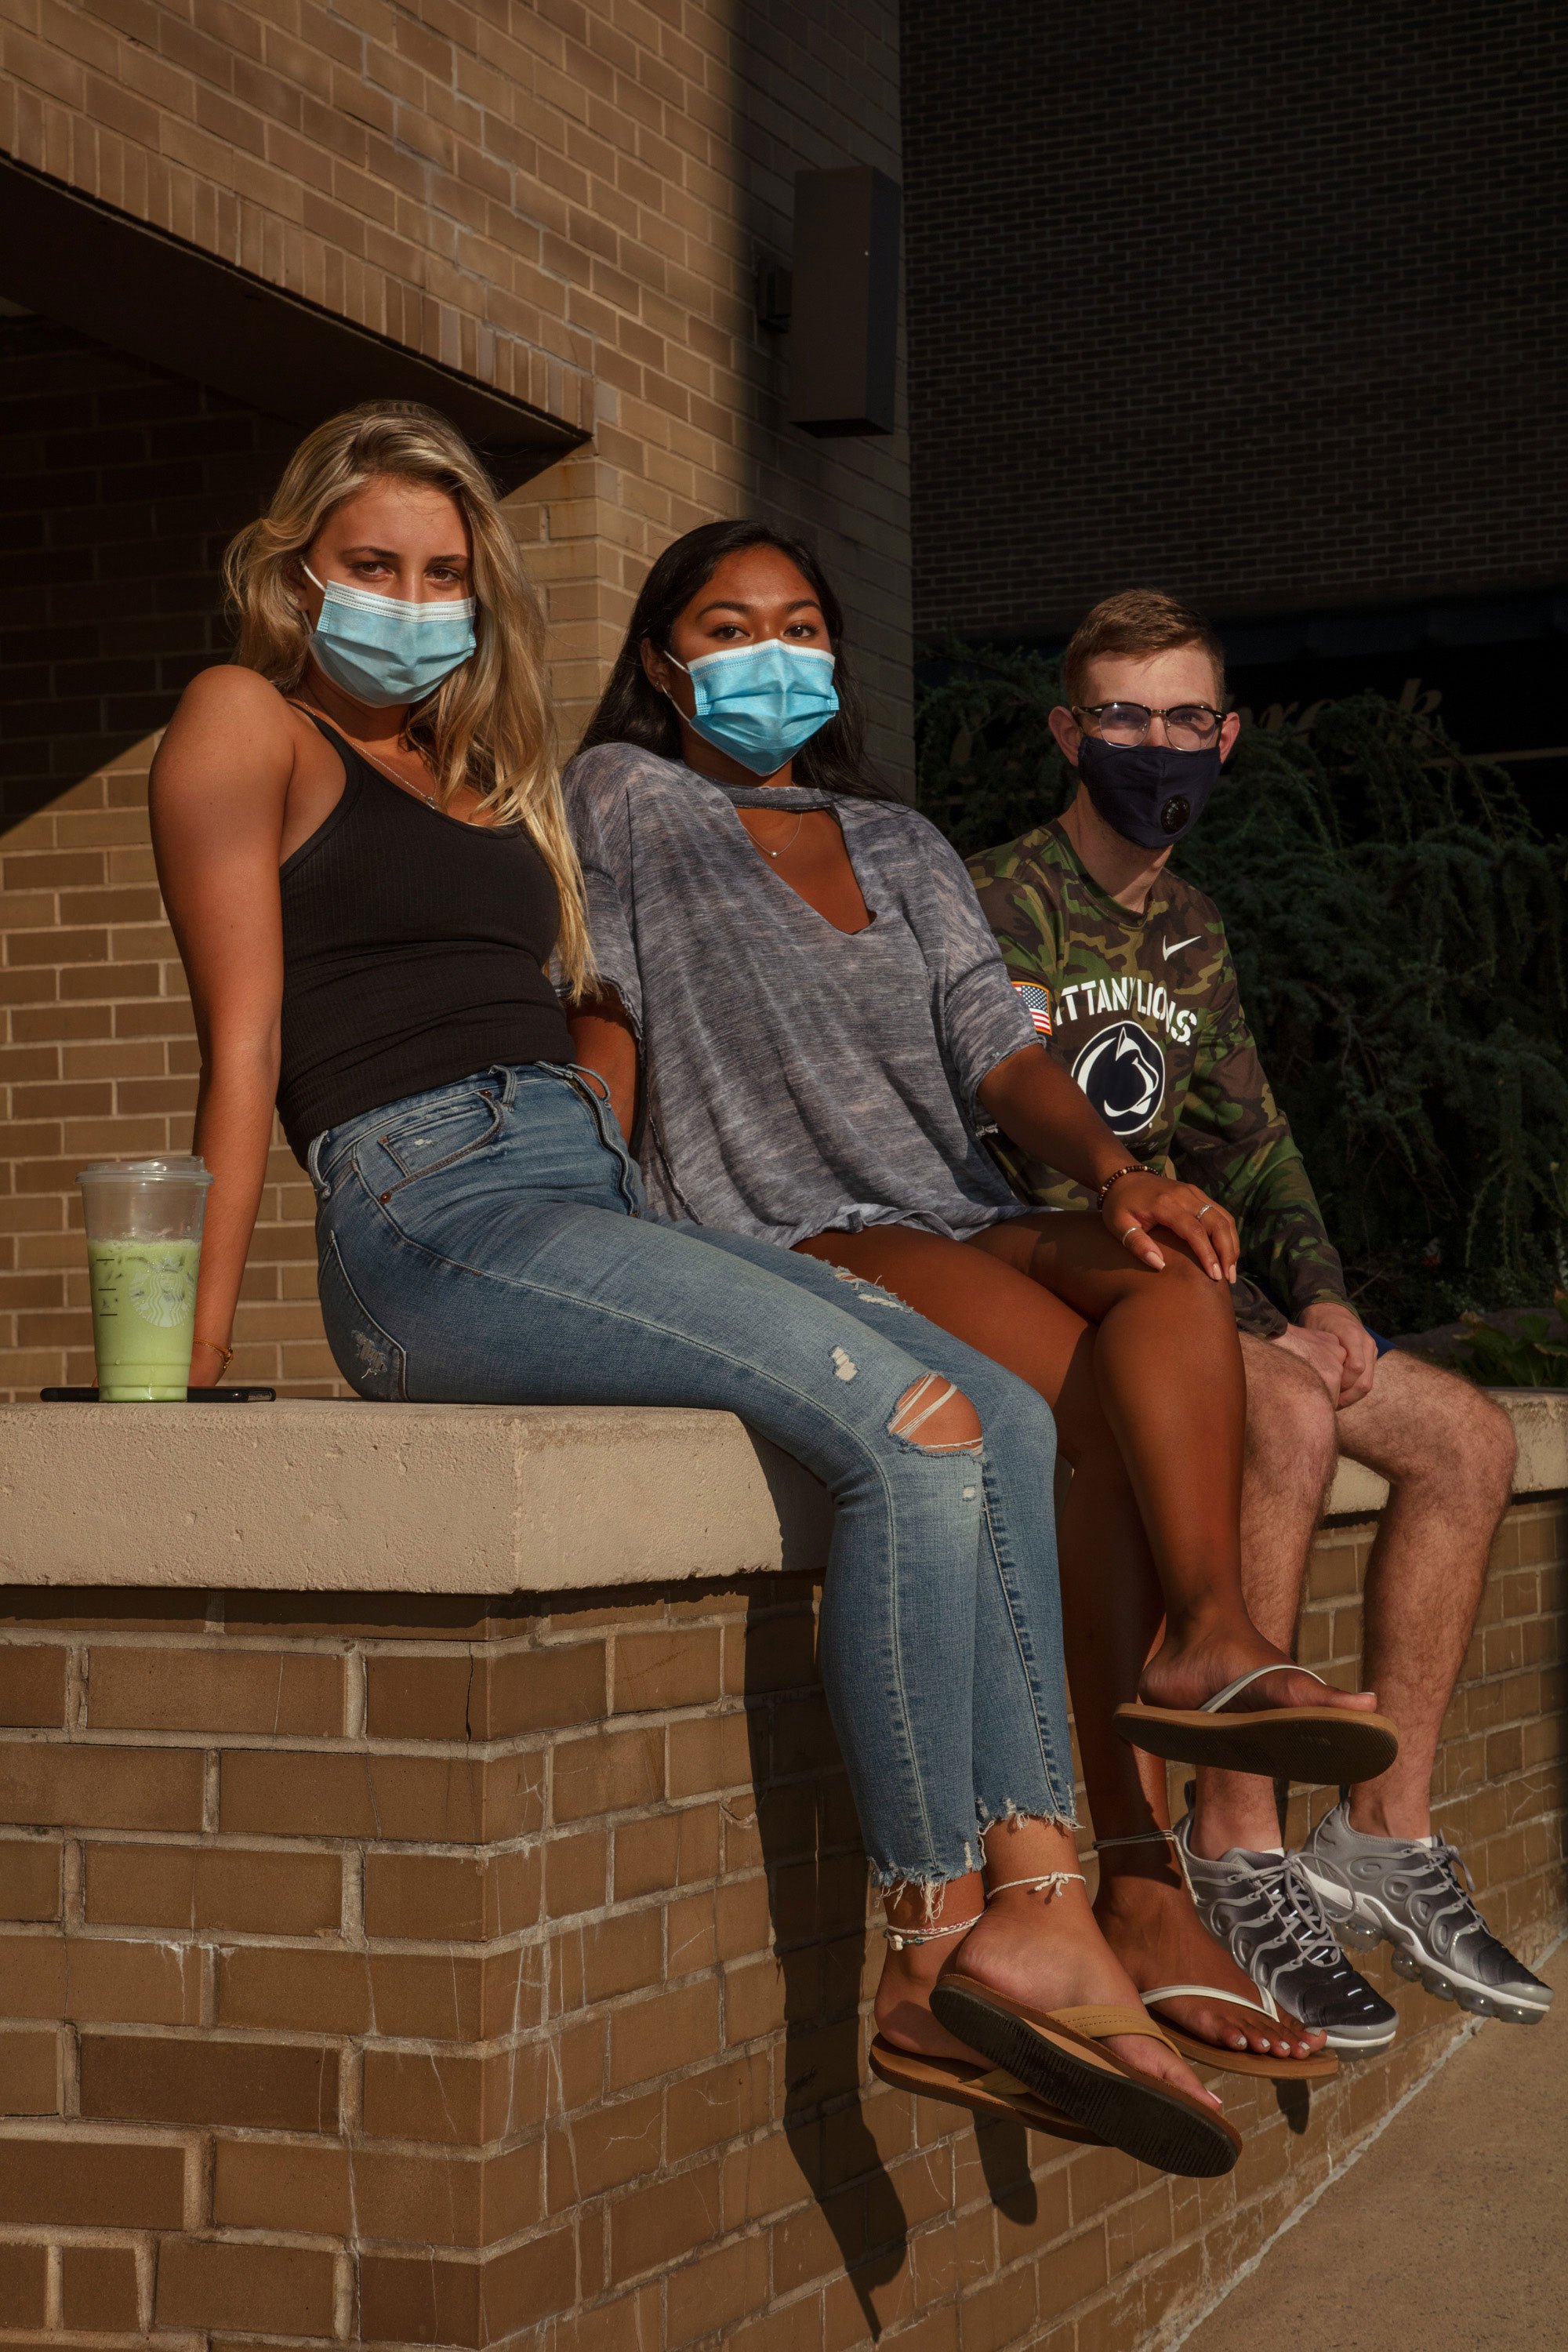 Michelle Mariette, 21, Senior. Liza Vecchiarello, 21, Senior Jordan Kalfon, 22, Senior “I’m personally kind of worried for my future and everyone else’s,” Vecchiarello says. “I’m a microbiology major, and I want to go into the medical research side of things. COVID is preventing me from attending a lot of these hands-on courses.” (Eva O'Leary for TIME)